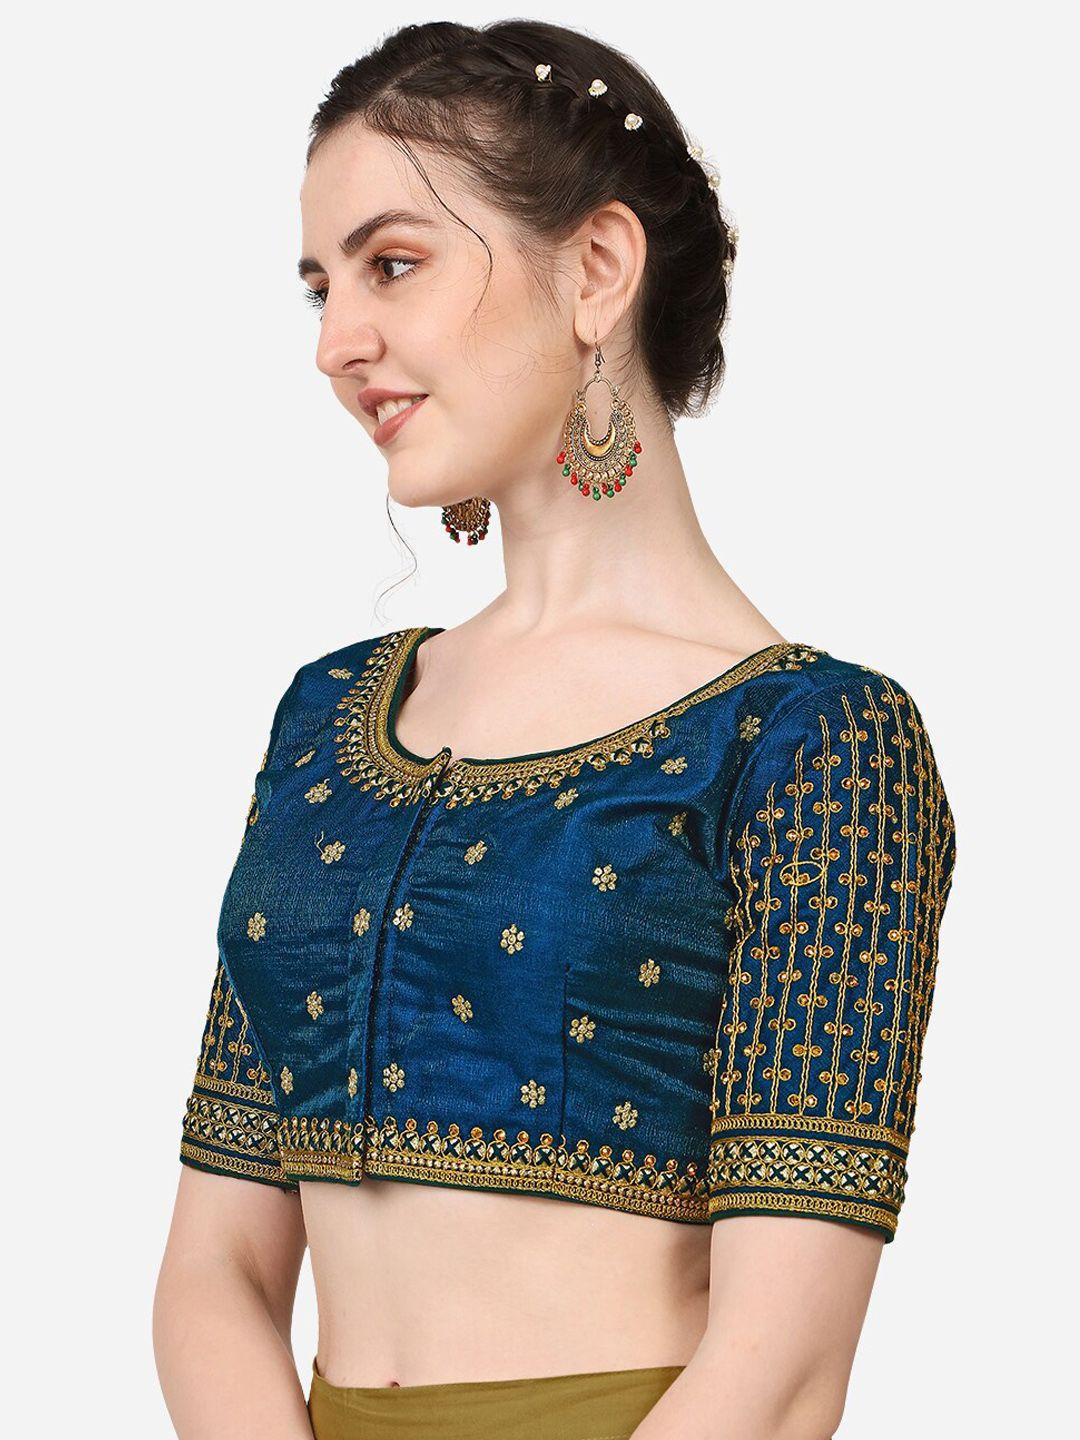 pujia mills teal blue & gold-coloured embroidered saree blouse